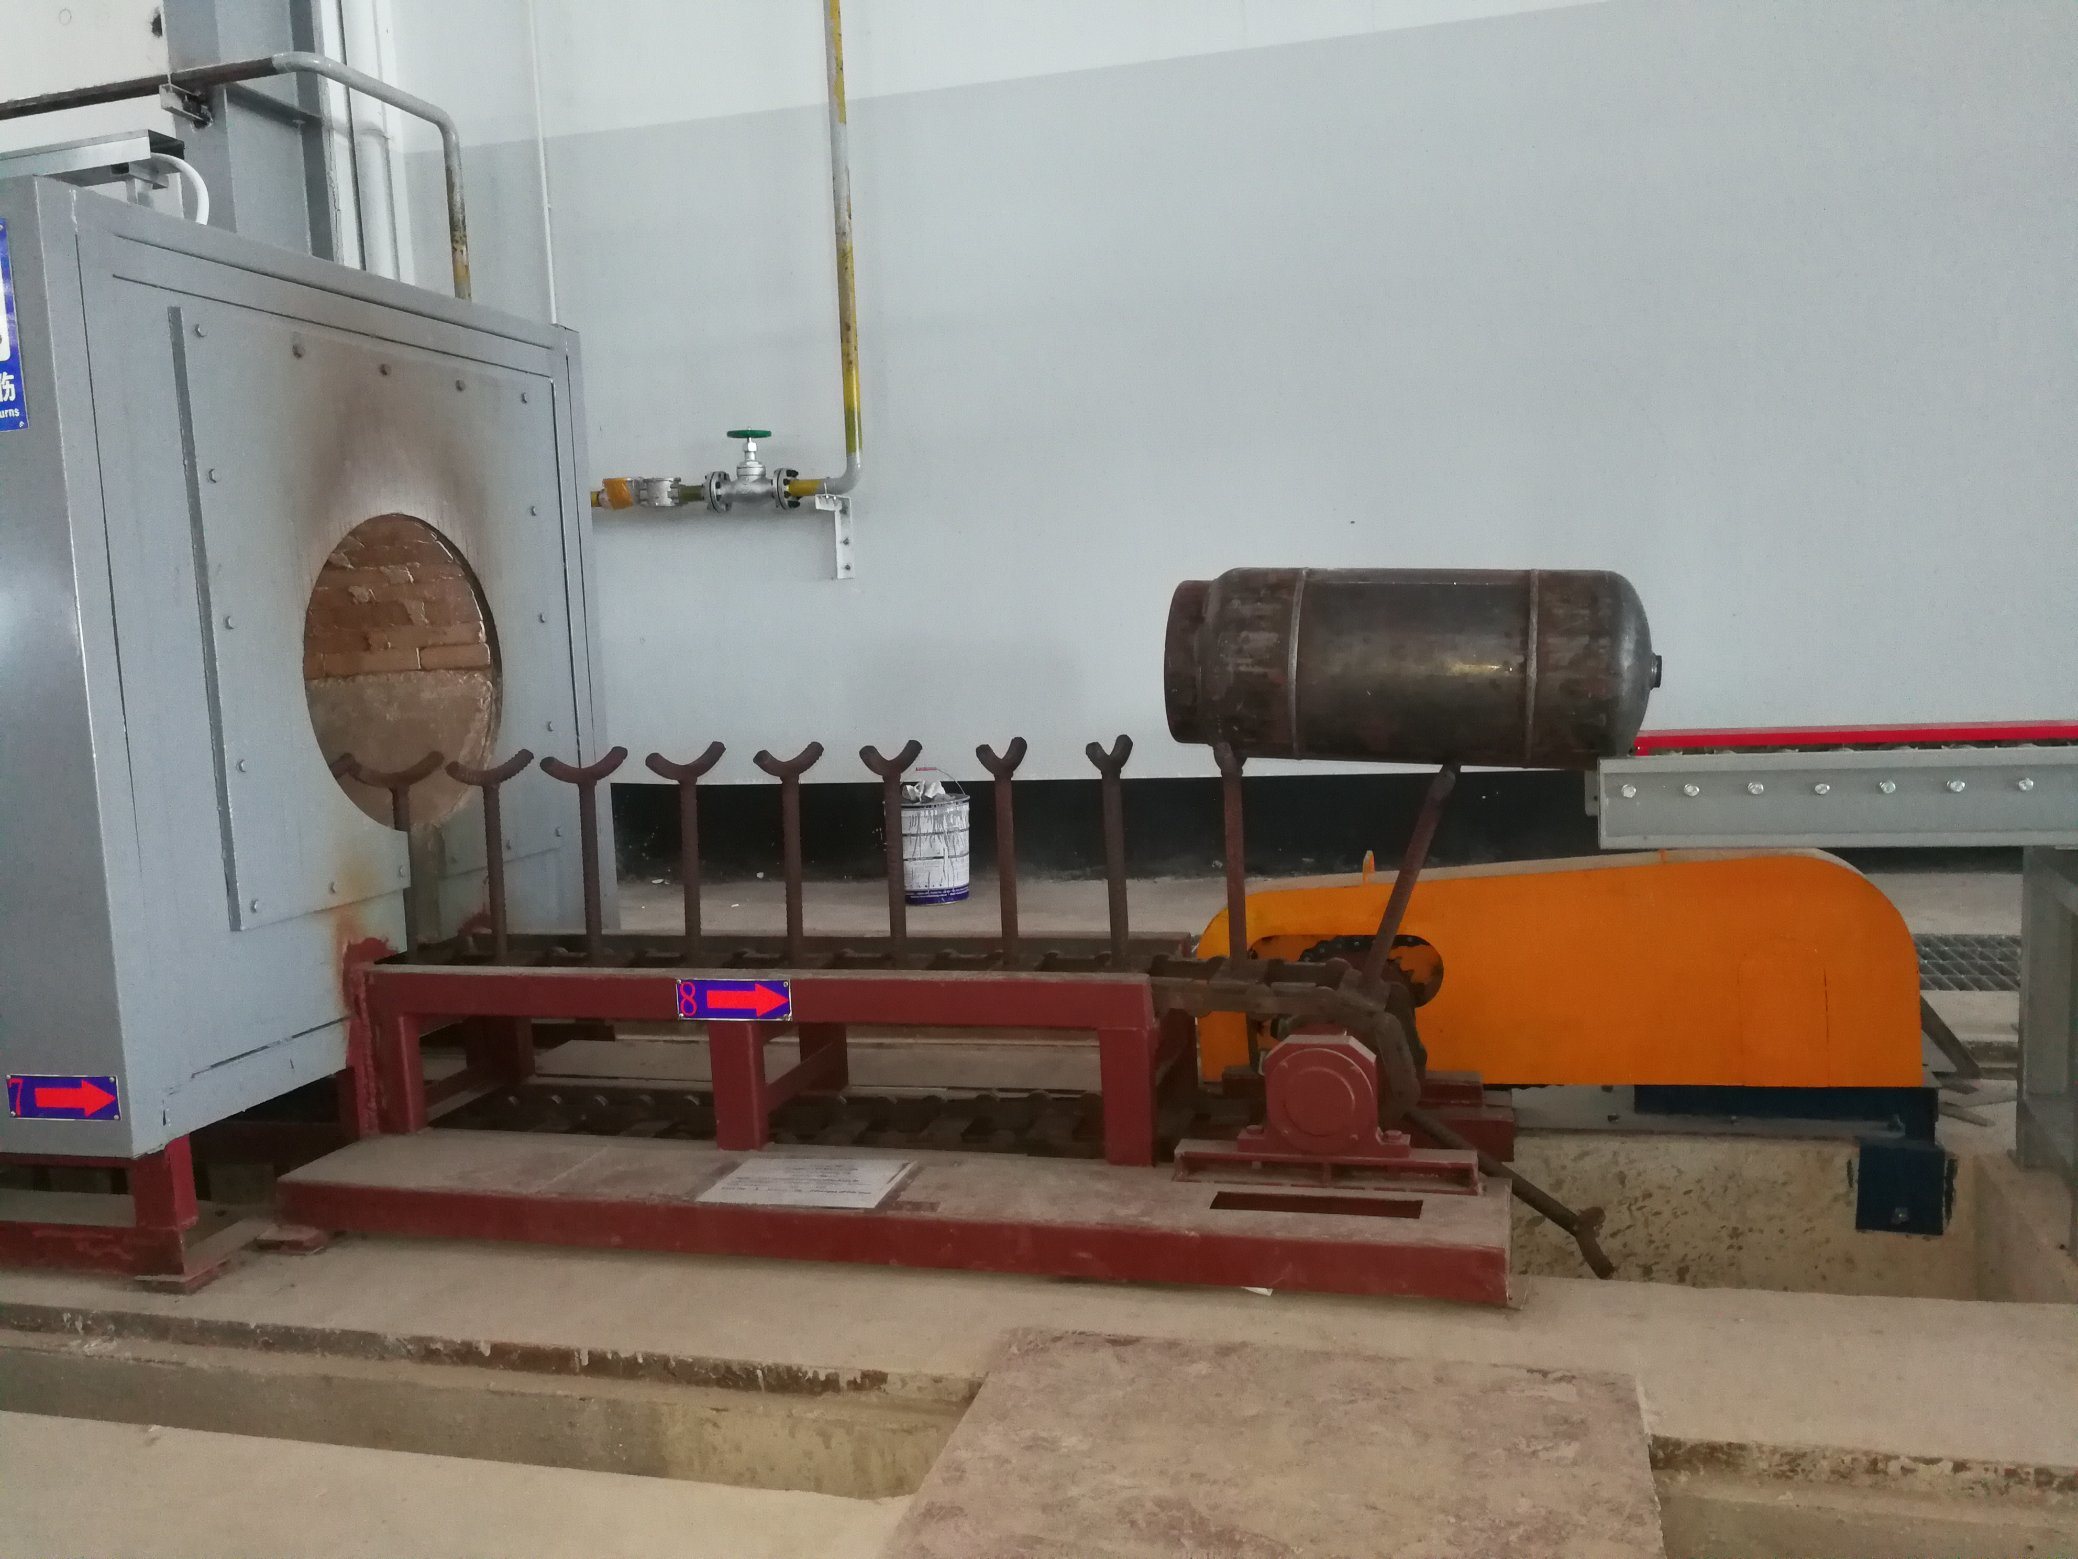 CNG LPG Gas Cylinder Annealing Furnace